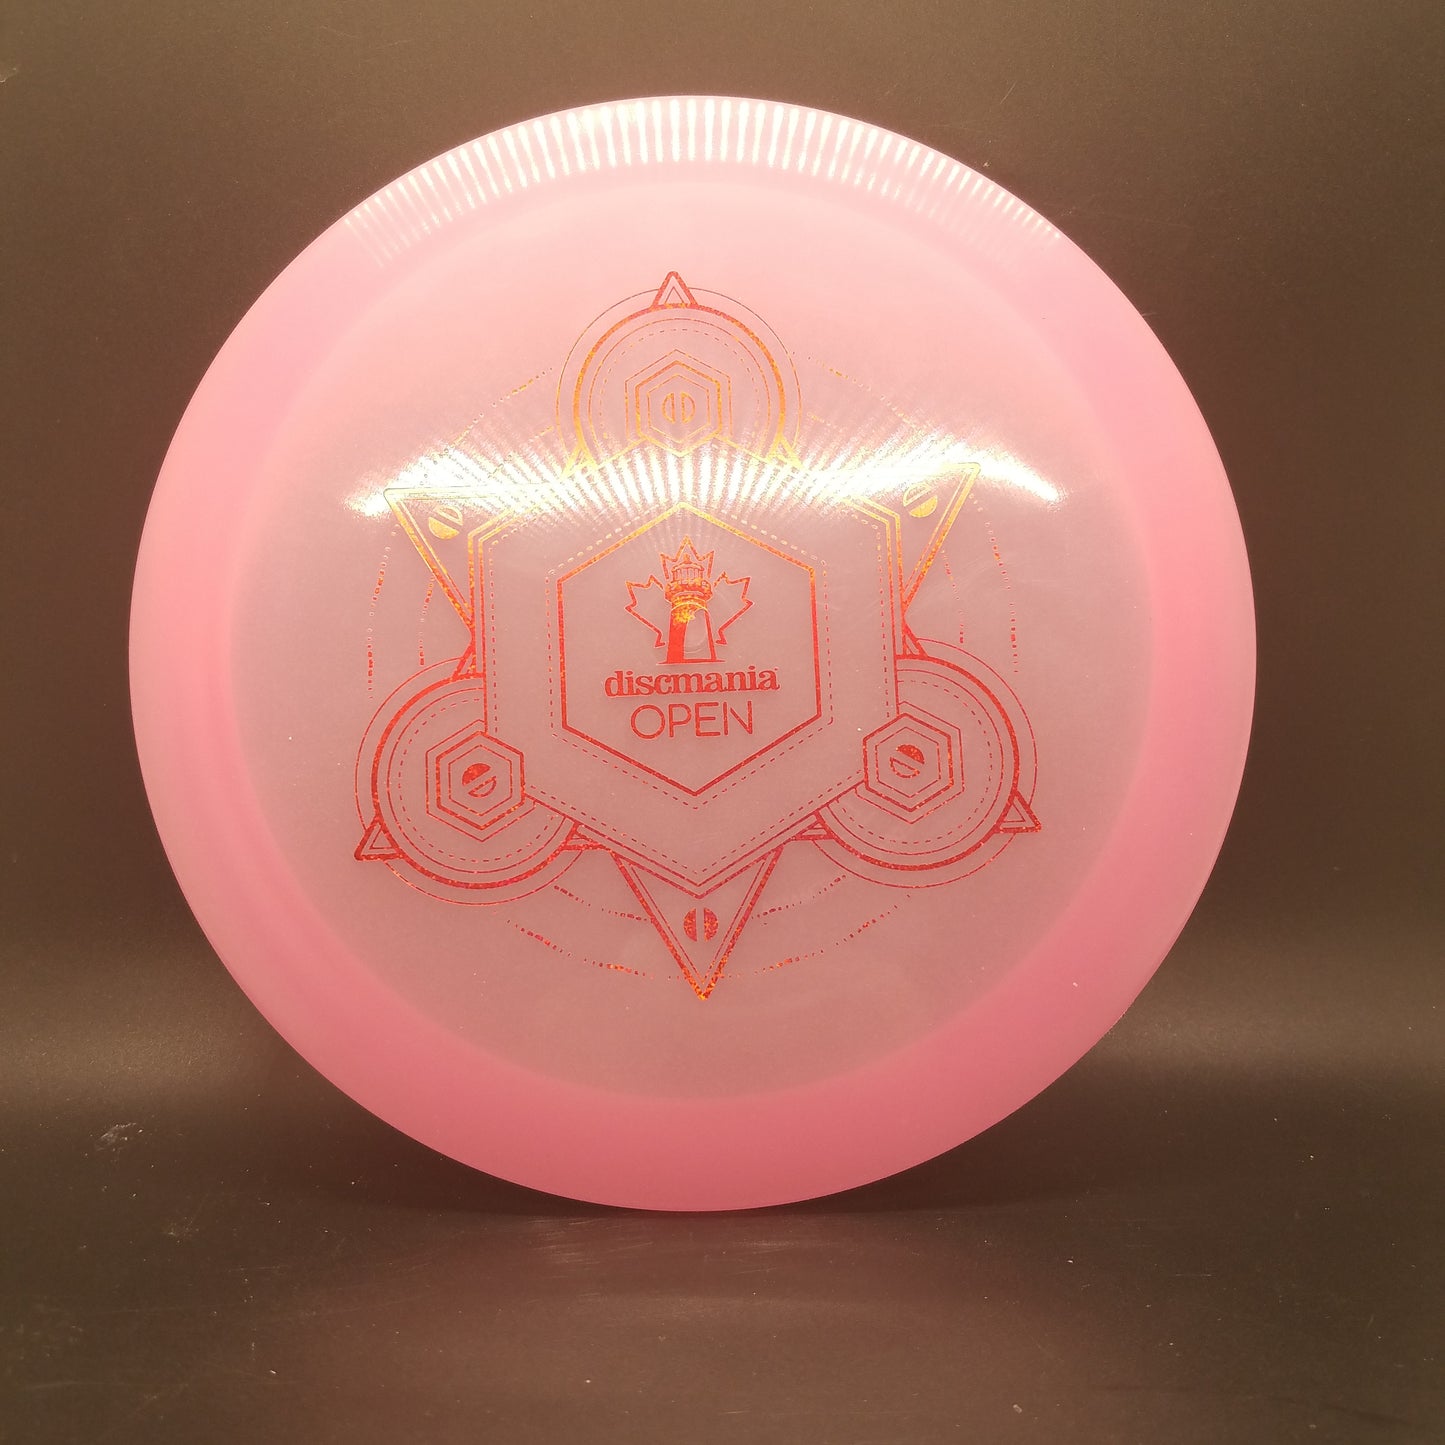 Disc Mania Color Glow FD3 Pink 174g